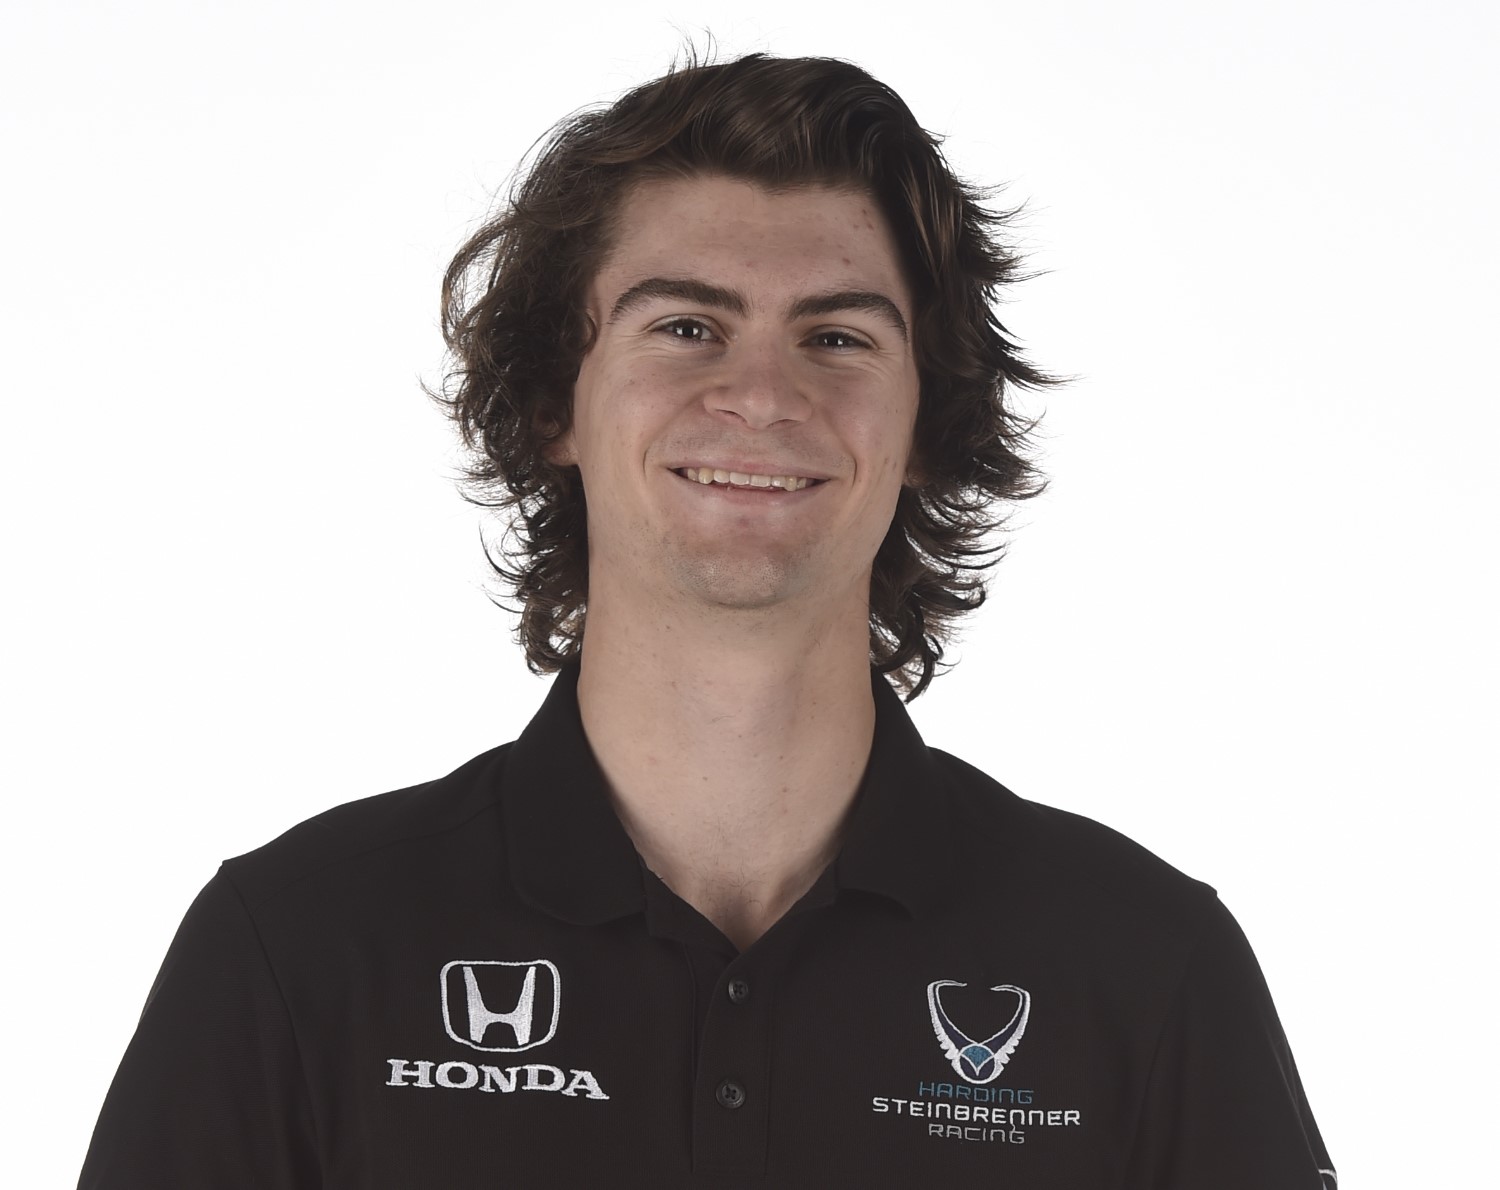 19-year old Colton Herta 2nd quick